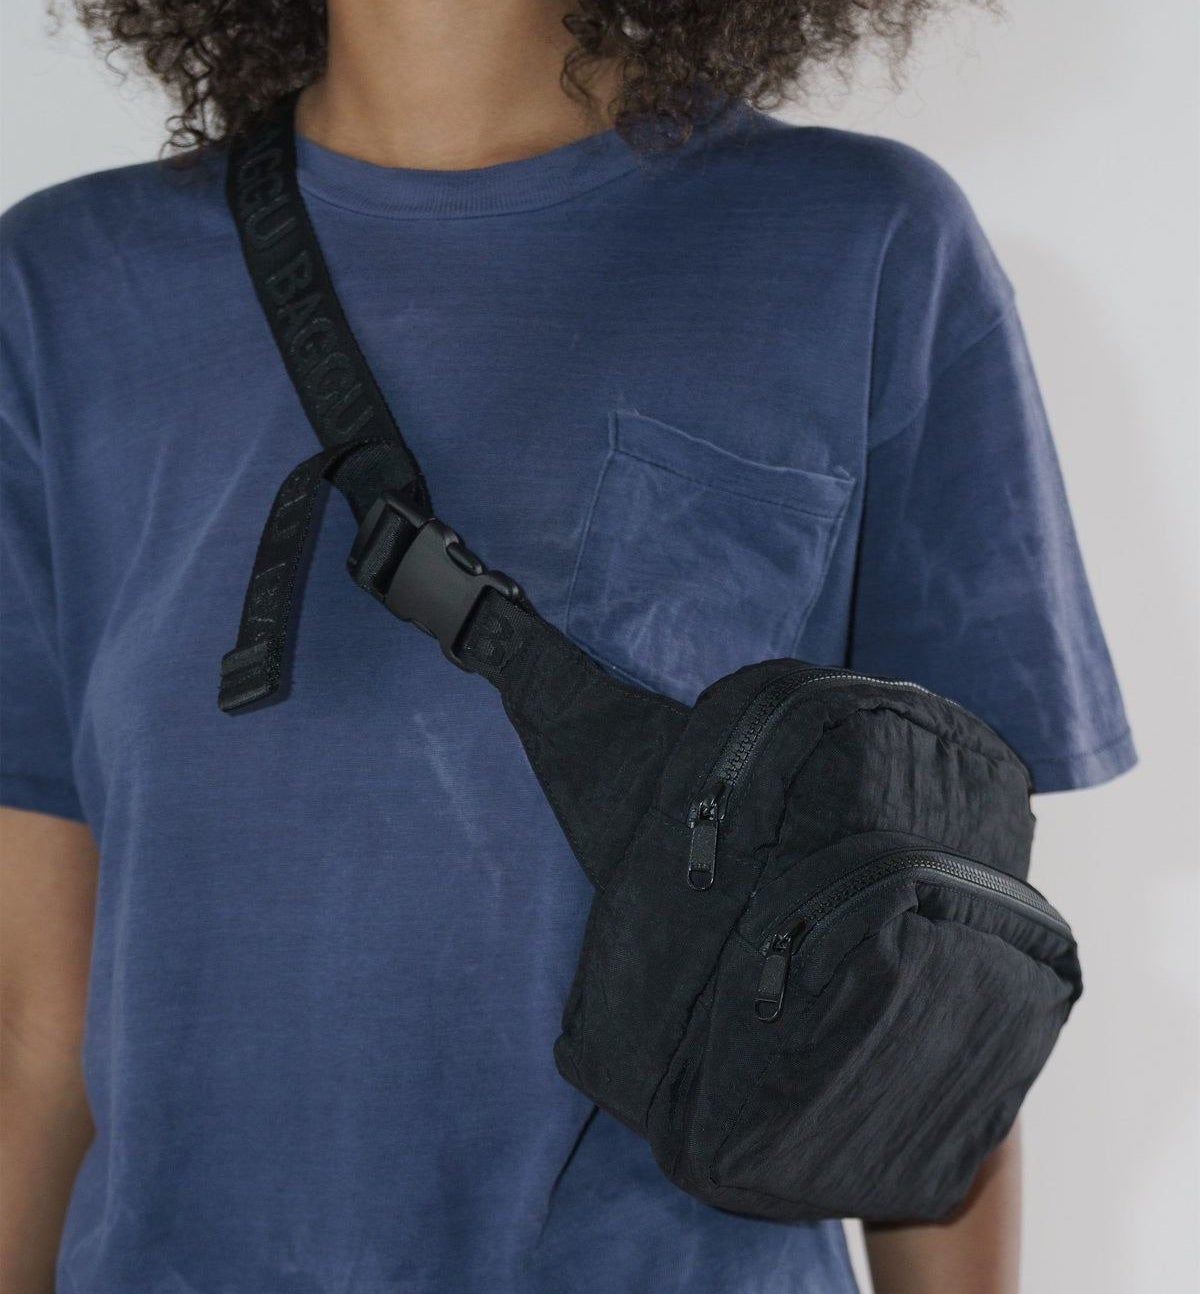 A person wearing the fanny pack crossbody style